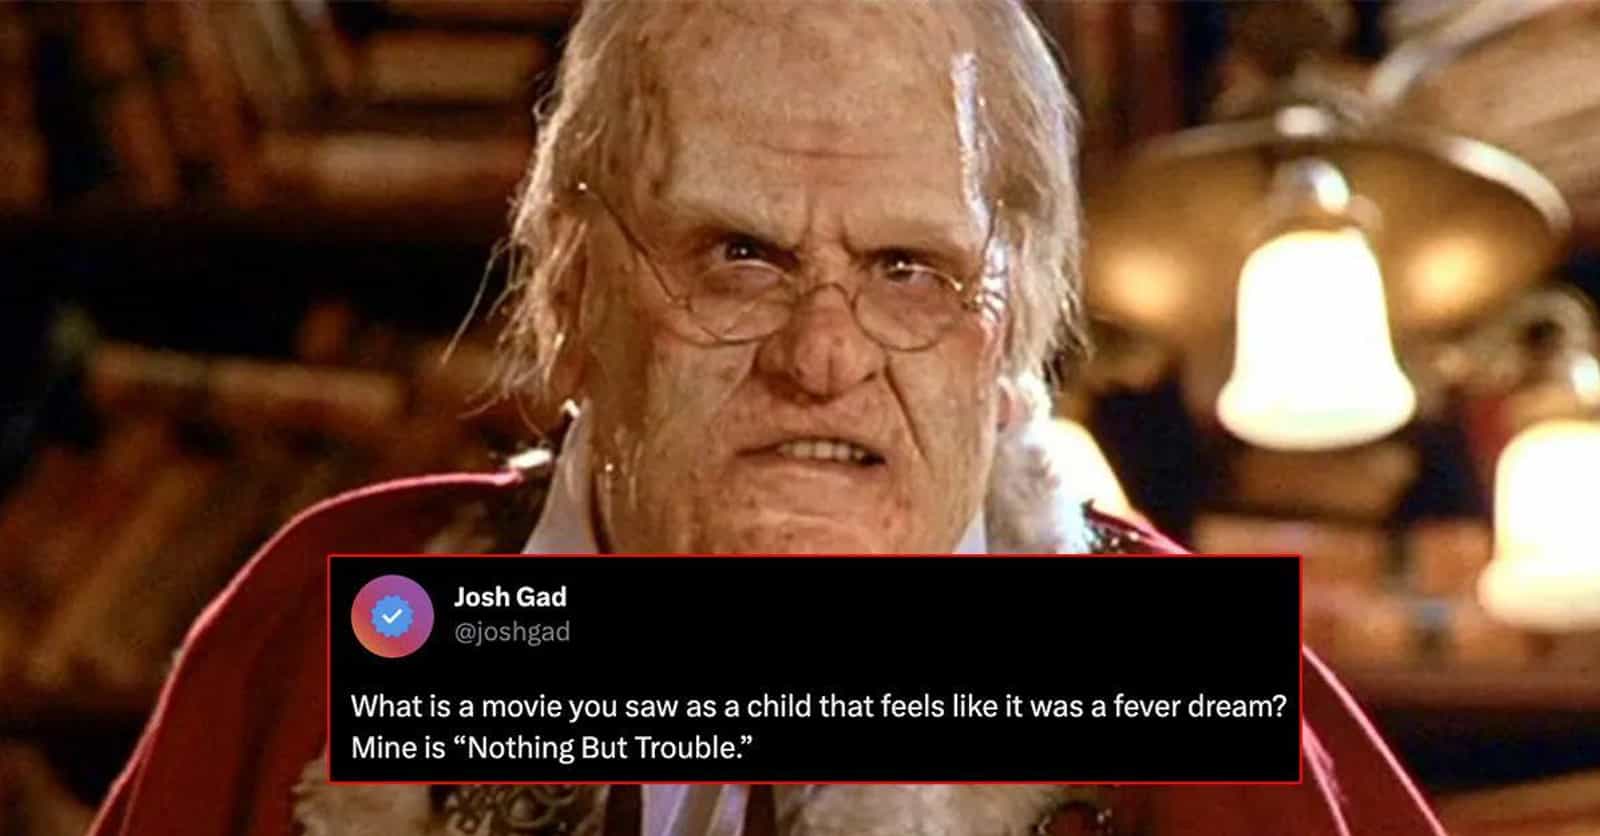 People Share The Unusual Movies They Saw As A Child That Felt Like A Fever Dream